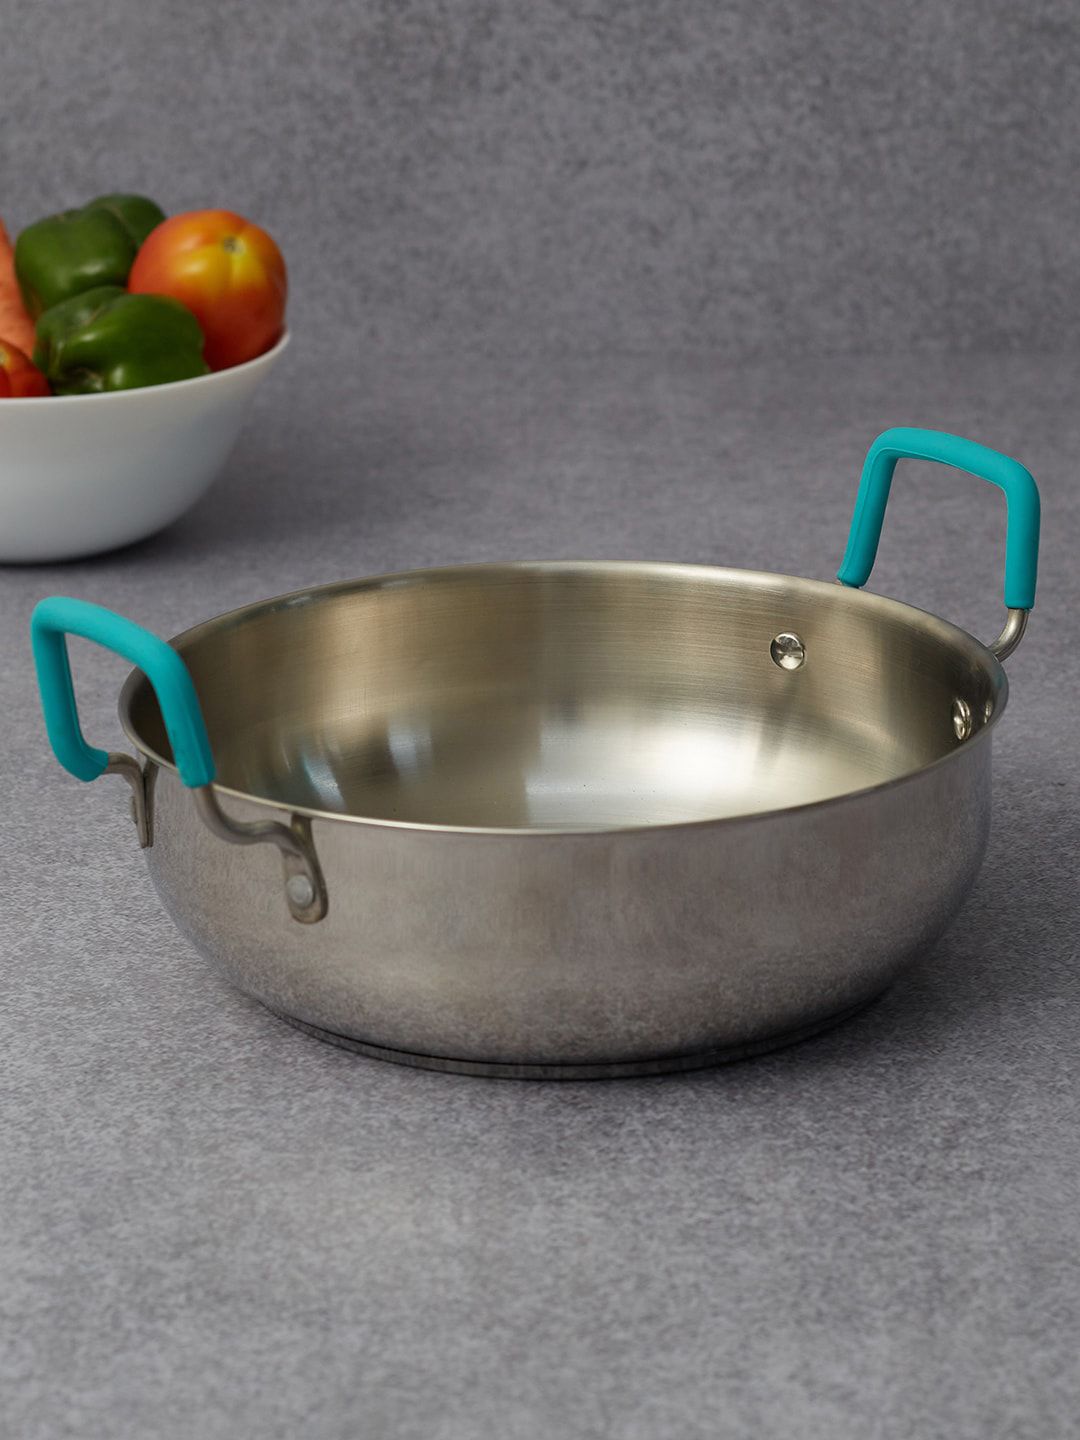 HomeTown Silver-Toned Solid Stainless Steel Capsule Bottom Kadhai Cookware Price in India